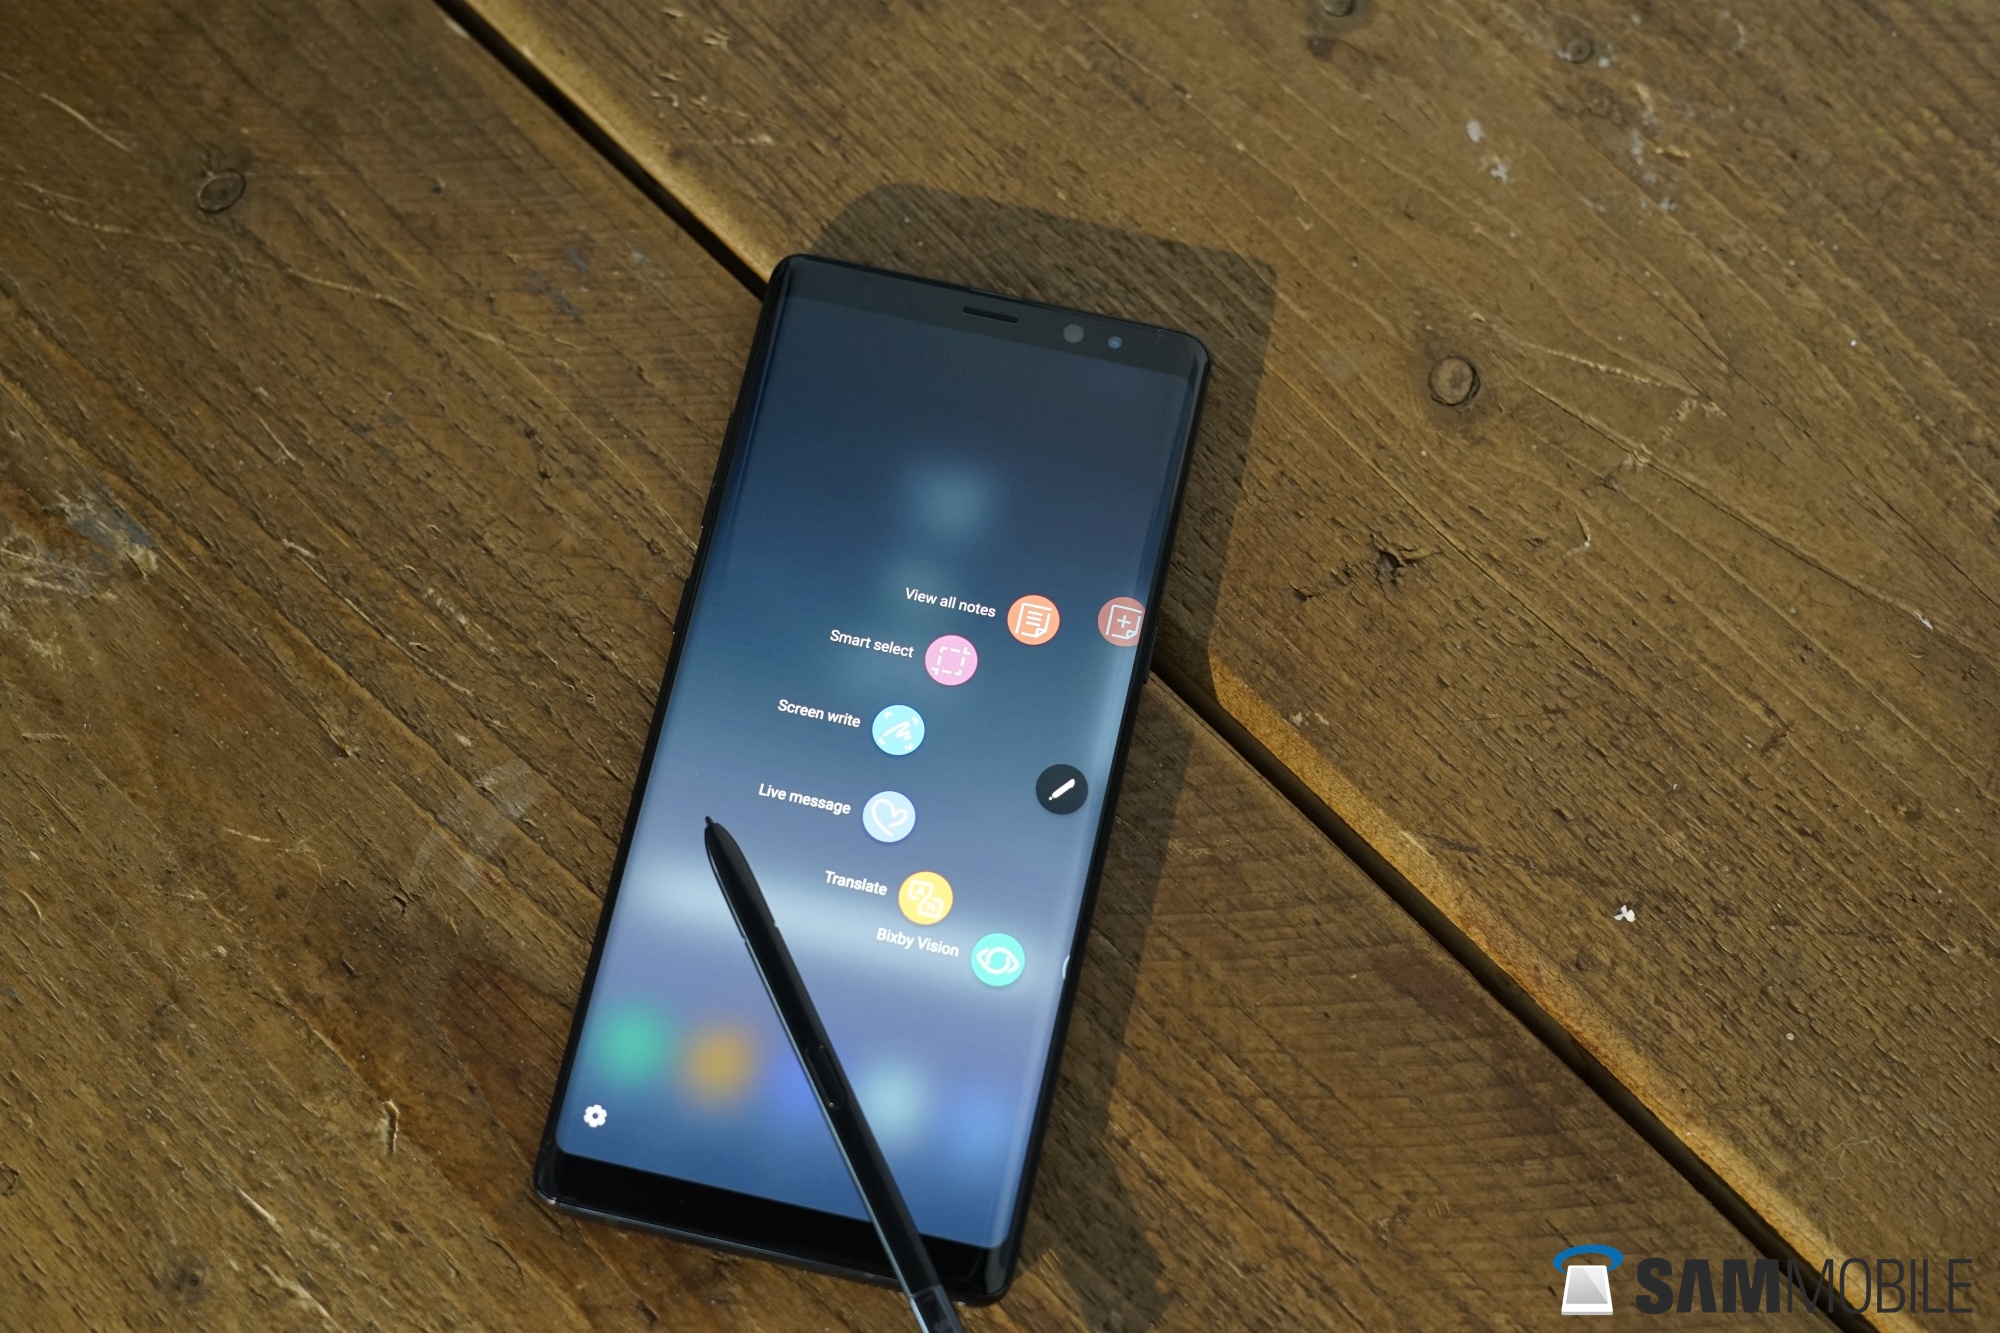 September 15 confirmed as the Galaxy Note 8 release date ...